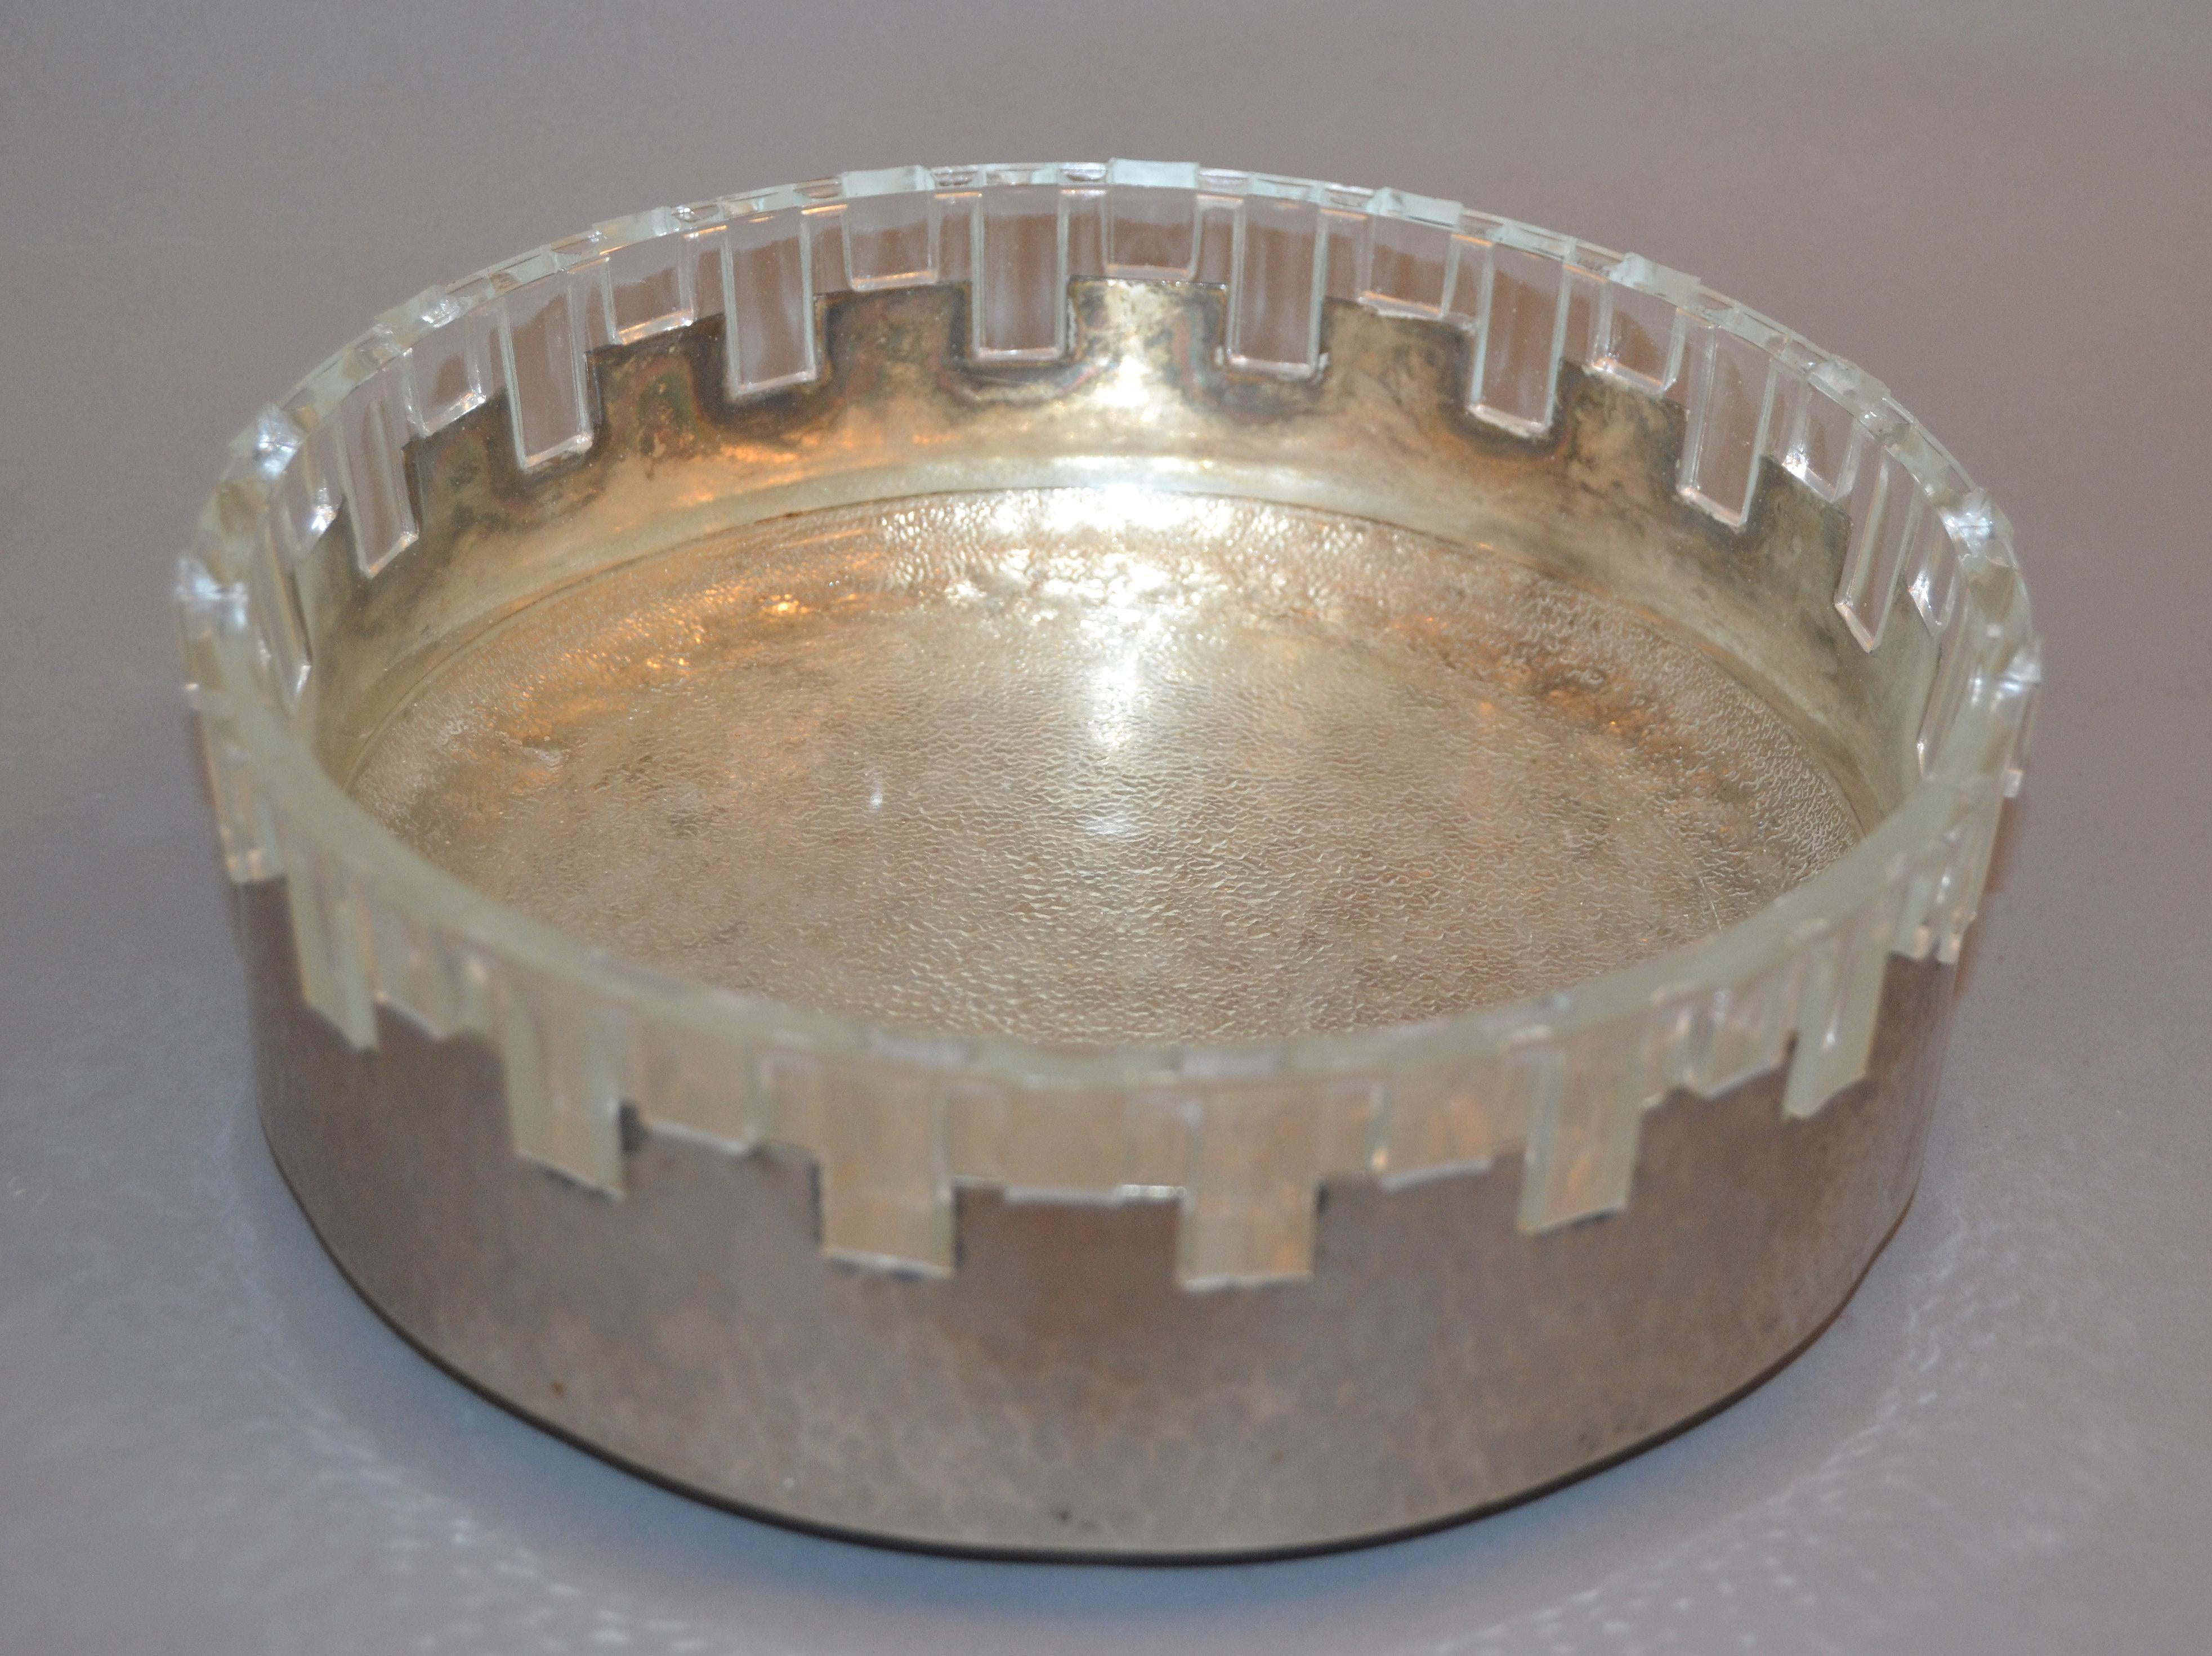 Handmade vintage lead crystal and hammered metal decorative bowl or serving bowl.
1960s unique and rare bowl made in England.
Stamped 'England' underneath.